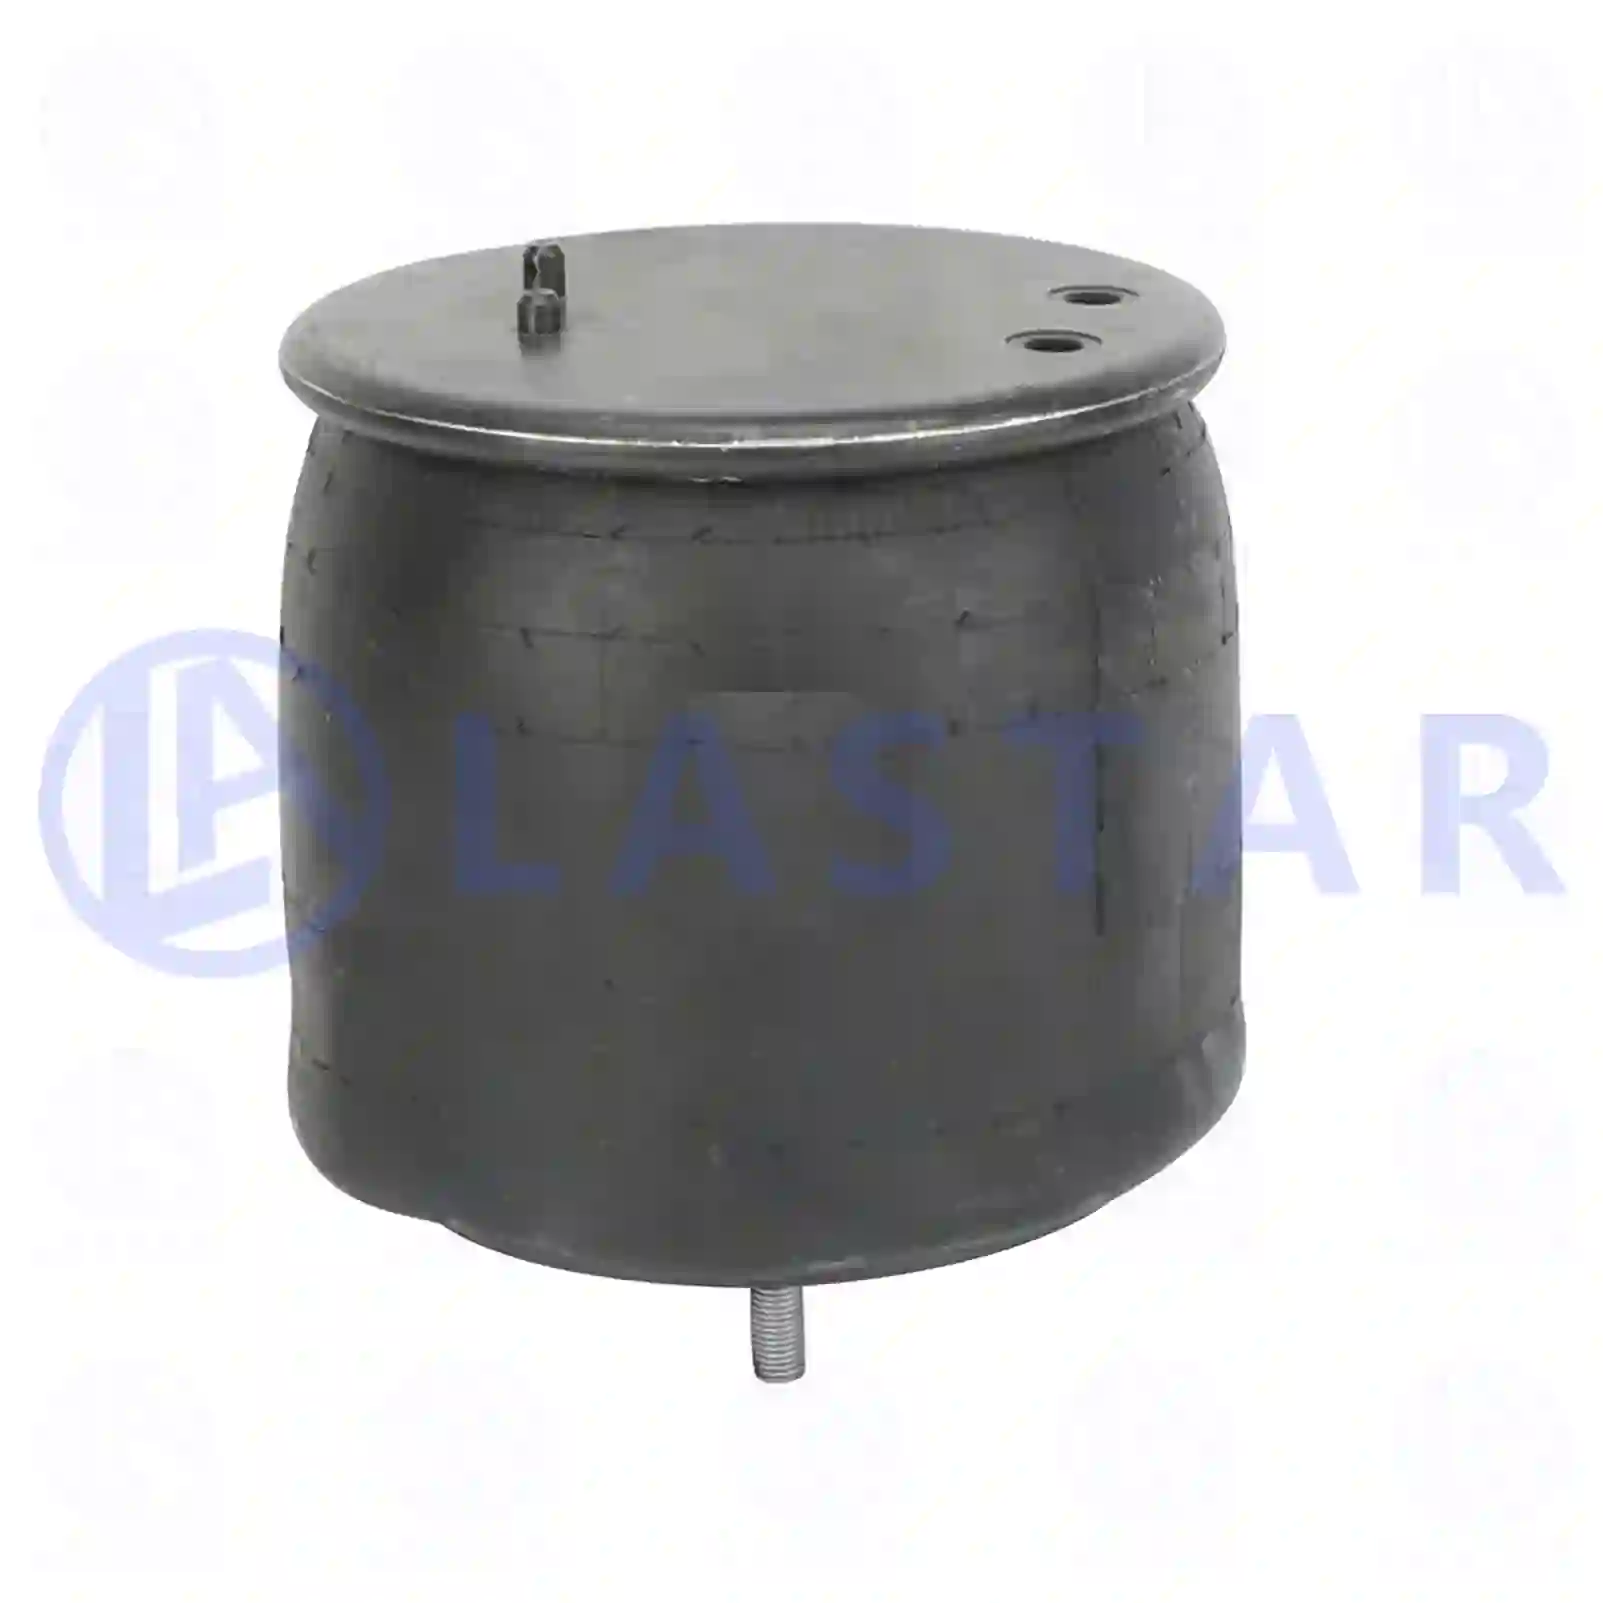 Air spring, with steel piston, 77727177, 1434933, 1932593, ||  77727177 Lastar Spare Part | Truck Spare Parts, Auotomotive Spare Parts Air spring, with steel piston, 77727177, 1434933, 1932593, ||  77727177 Lastar Spare Part | Truck Spare Parts, Auotomotive Spare Parts